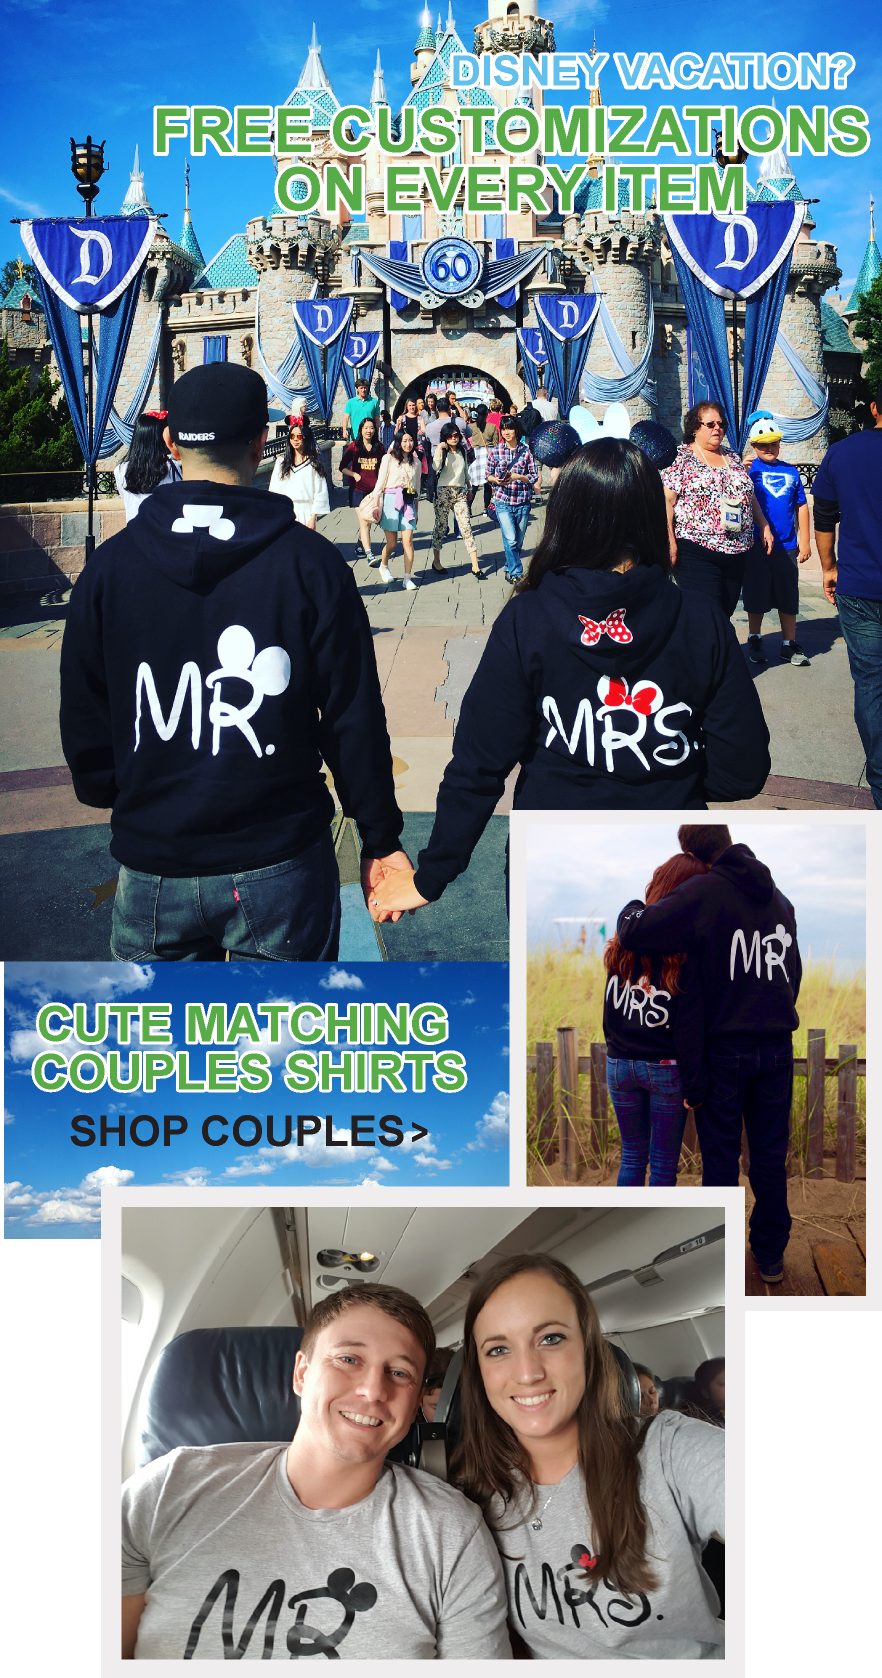 Mr and Mrs couples wearing hoodies and t shirts  at Disney World